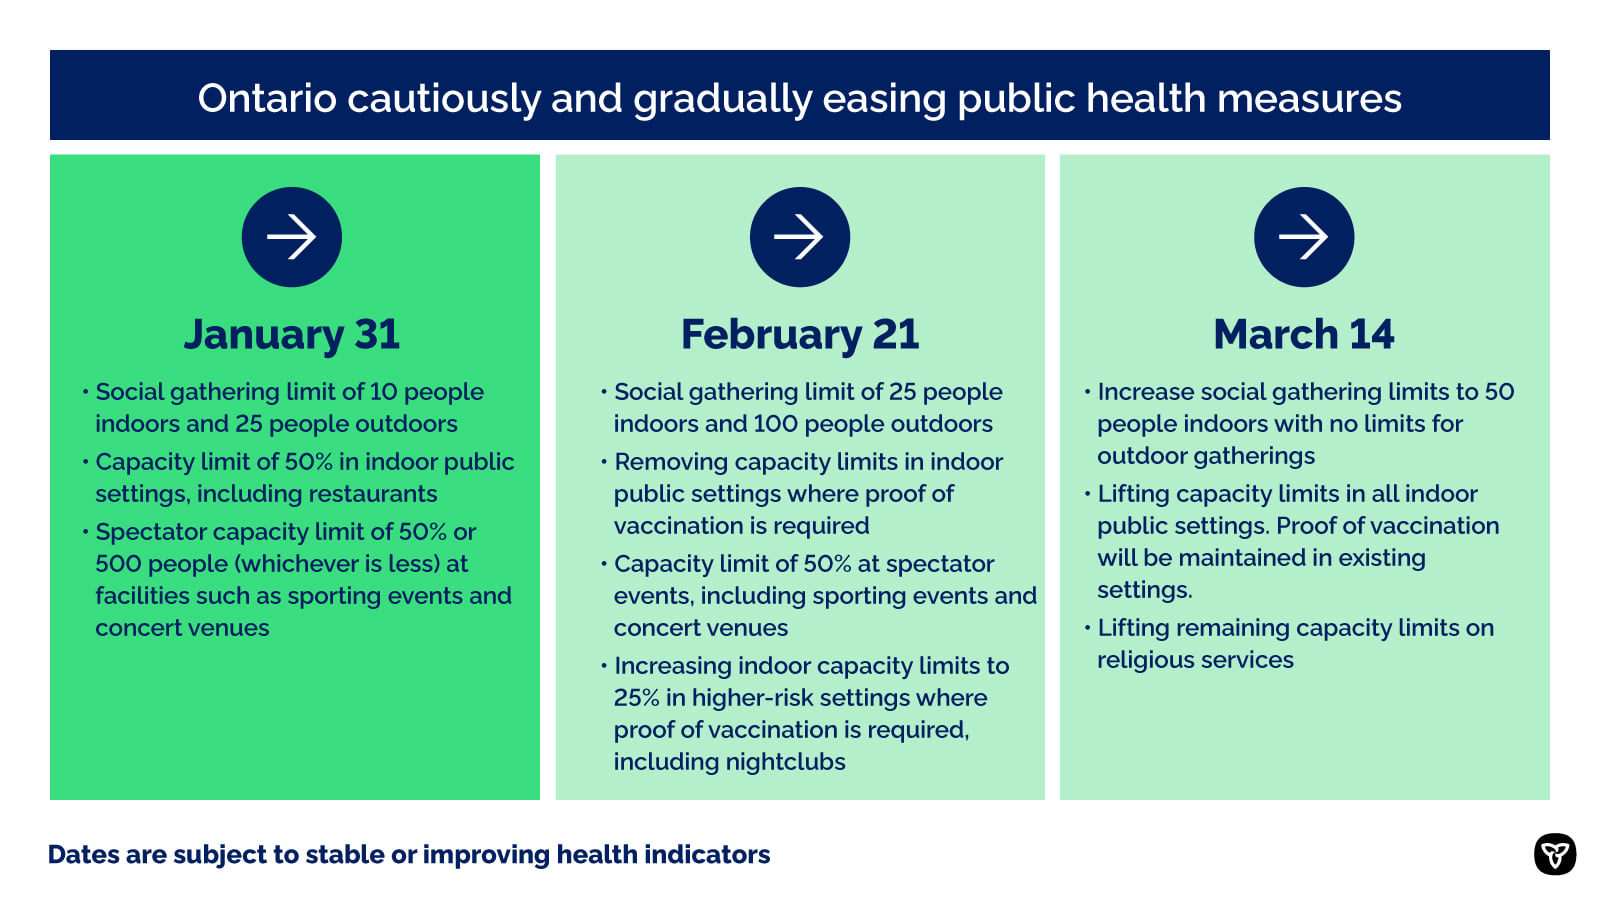 Ontario Outlines Steps to Cautiously and Gradually Ease Public Health Measures